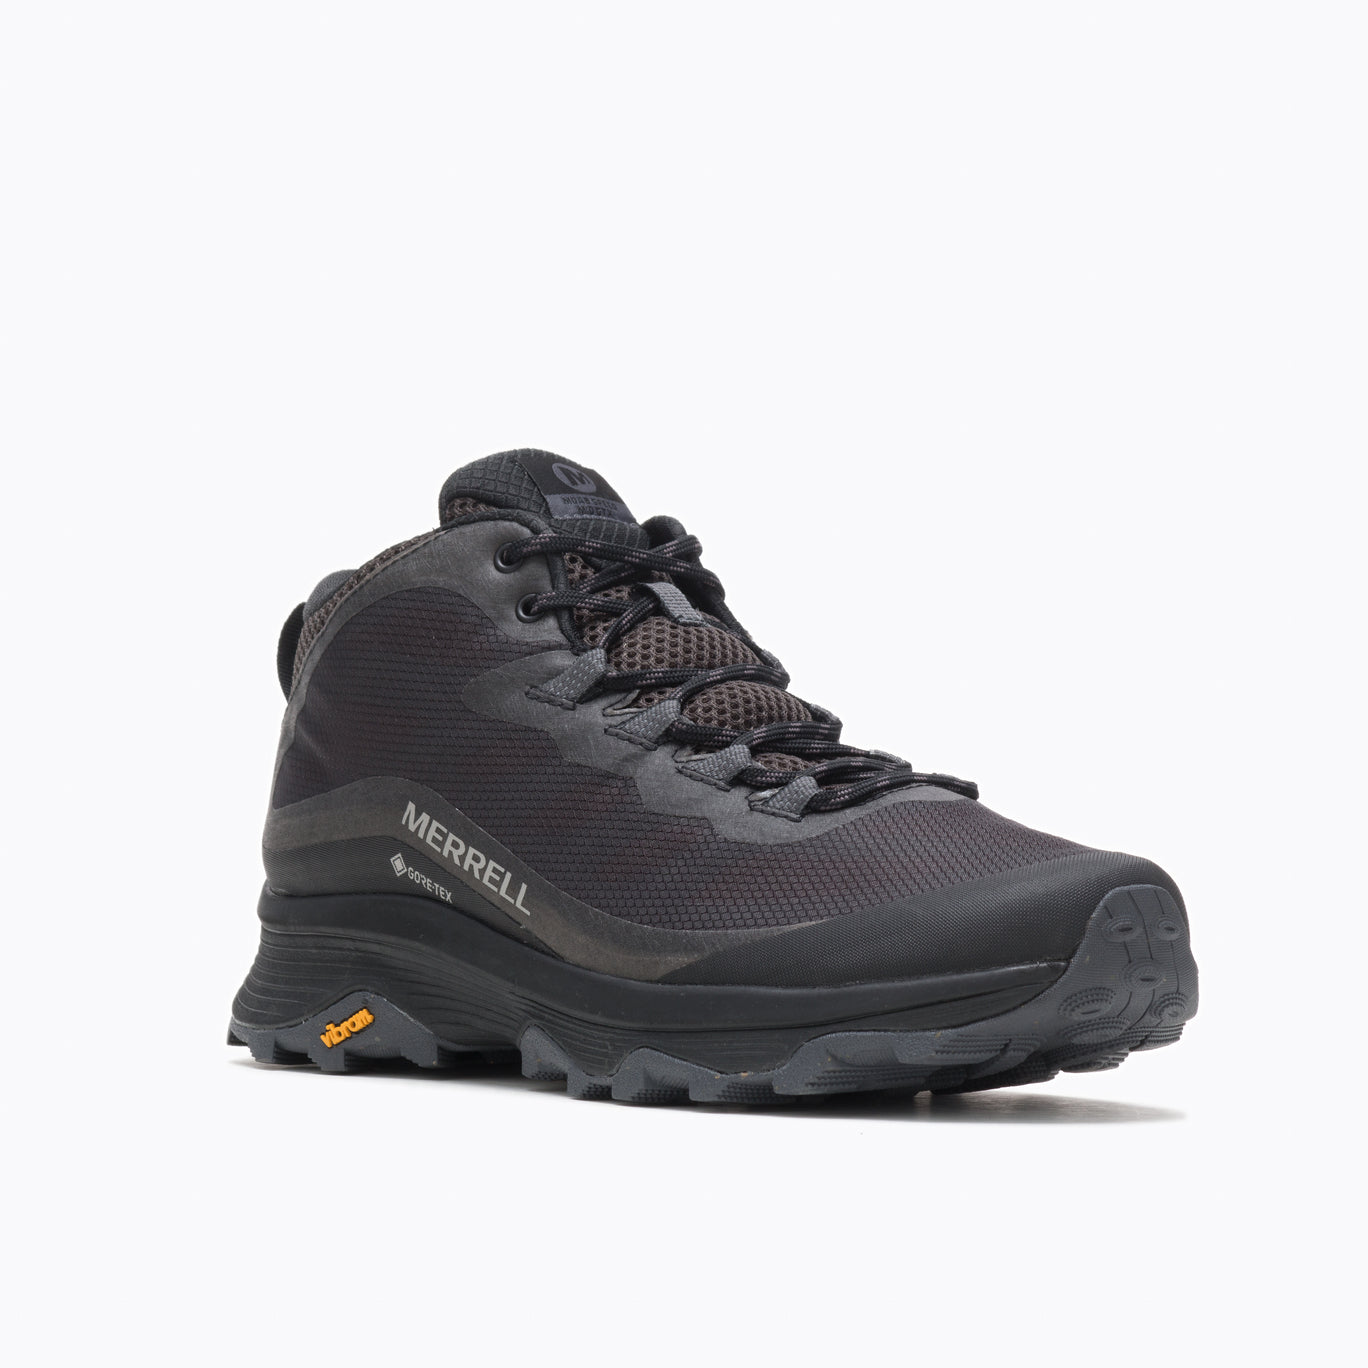 Moab Speed Mid GORE-TEX for Men